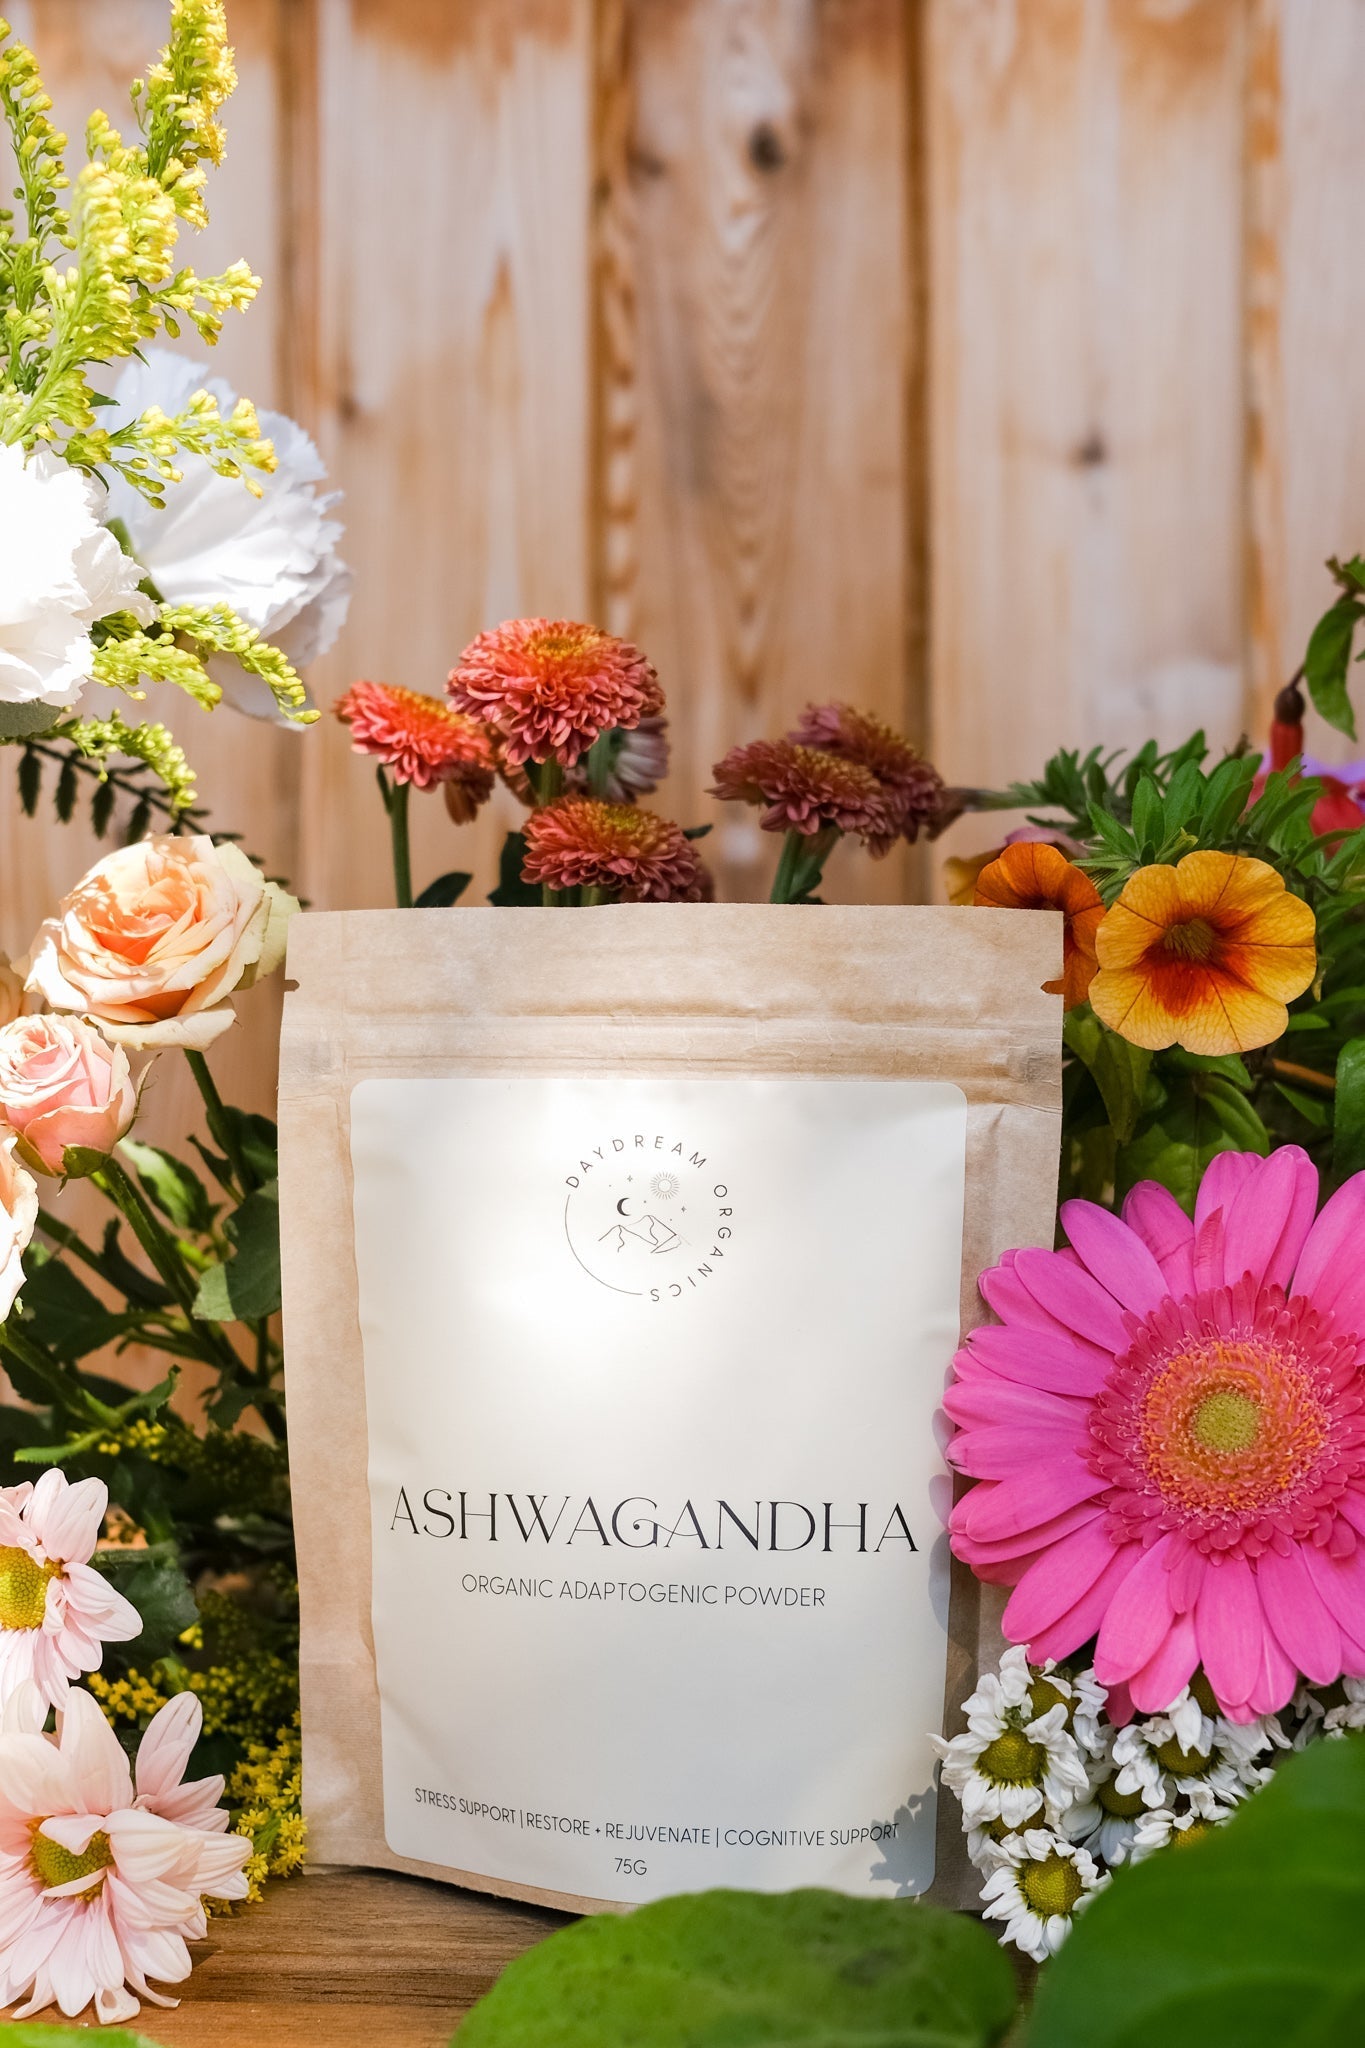 Cherished for centuries in Ayurveda, our organic Ashwagandha is grown in the Pacific Northwest and is an adaptogenic herb that can be used daily to support a healthy stress response and adrenal functioning as well as to balance cortisol levels.